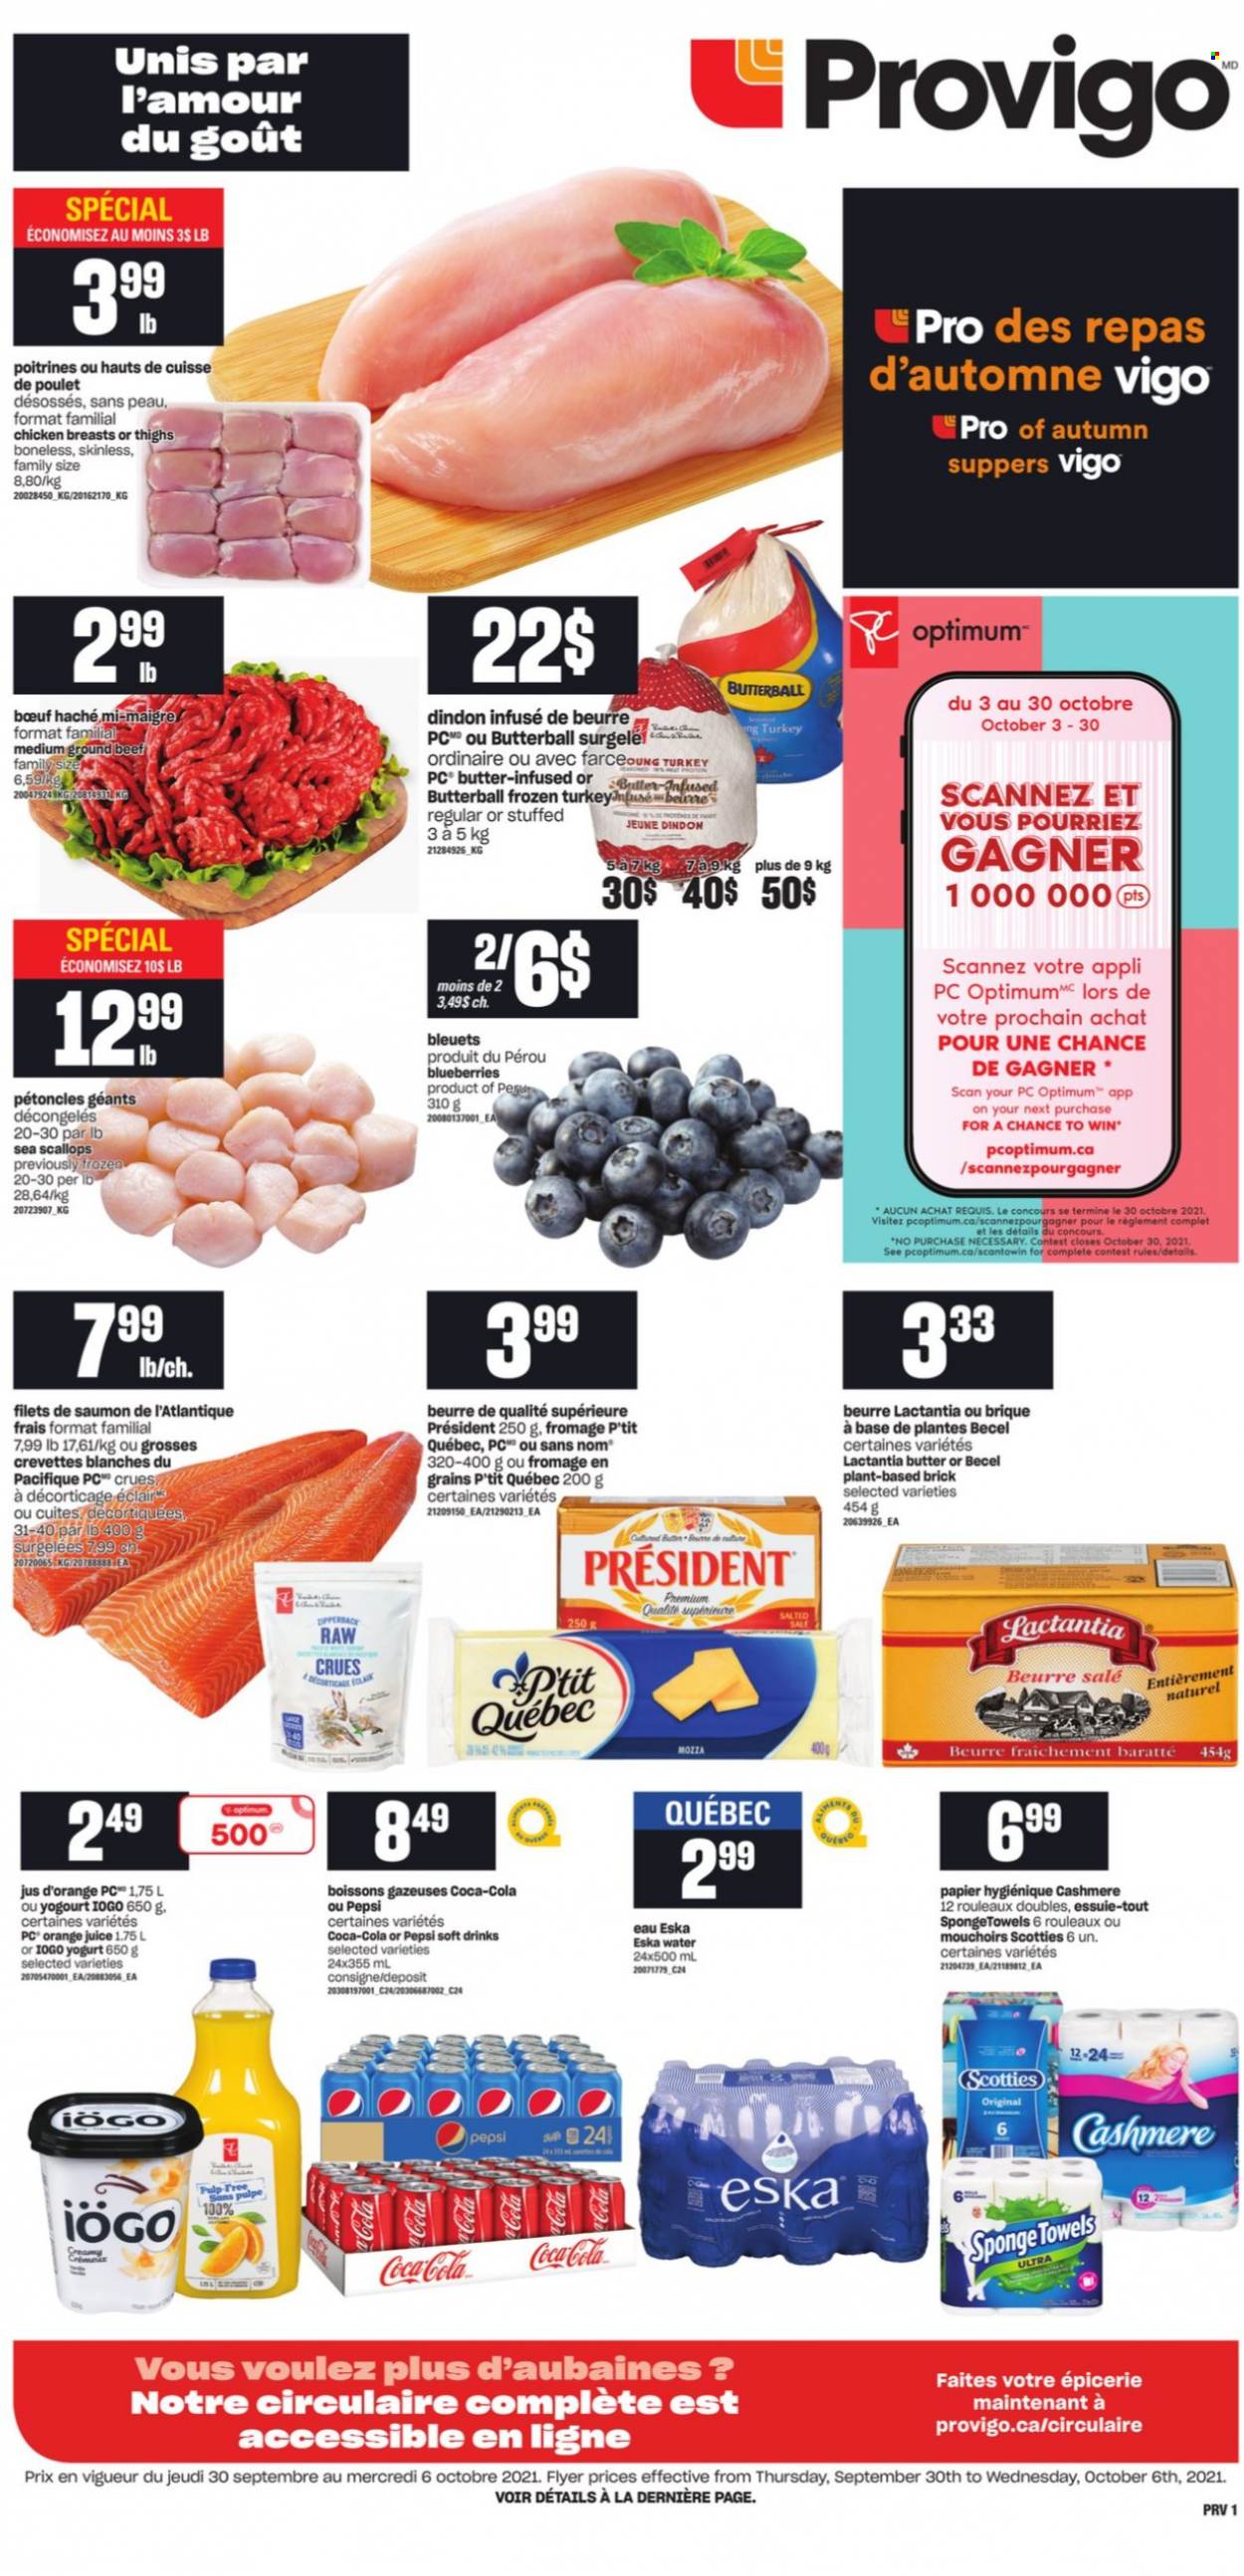 thumbnail - Provigo Flyer - September 30, 2021 - October 06, 2021 - Sales products - blueberries, scallops, Butterball, Président, yoghurt, Coca-Cola, Pepsi, orange juice, juice, soft drink, chicken breasts, beef meat, ground beef. Page 1.